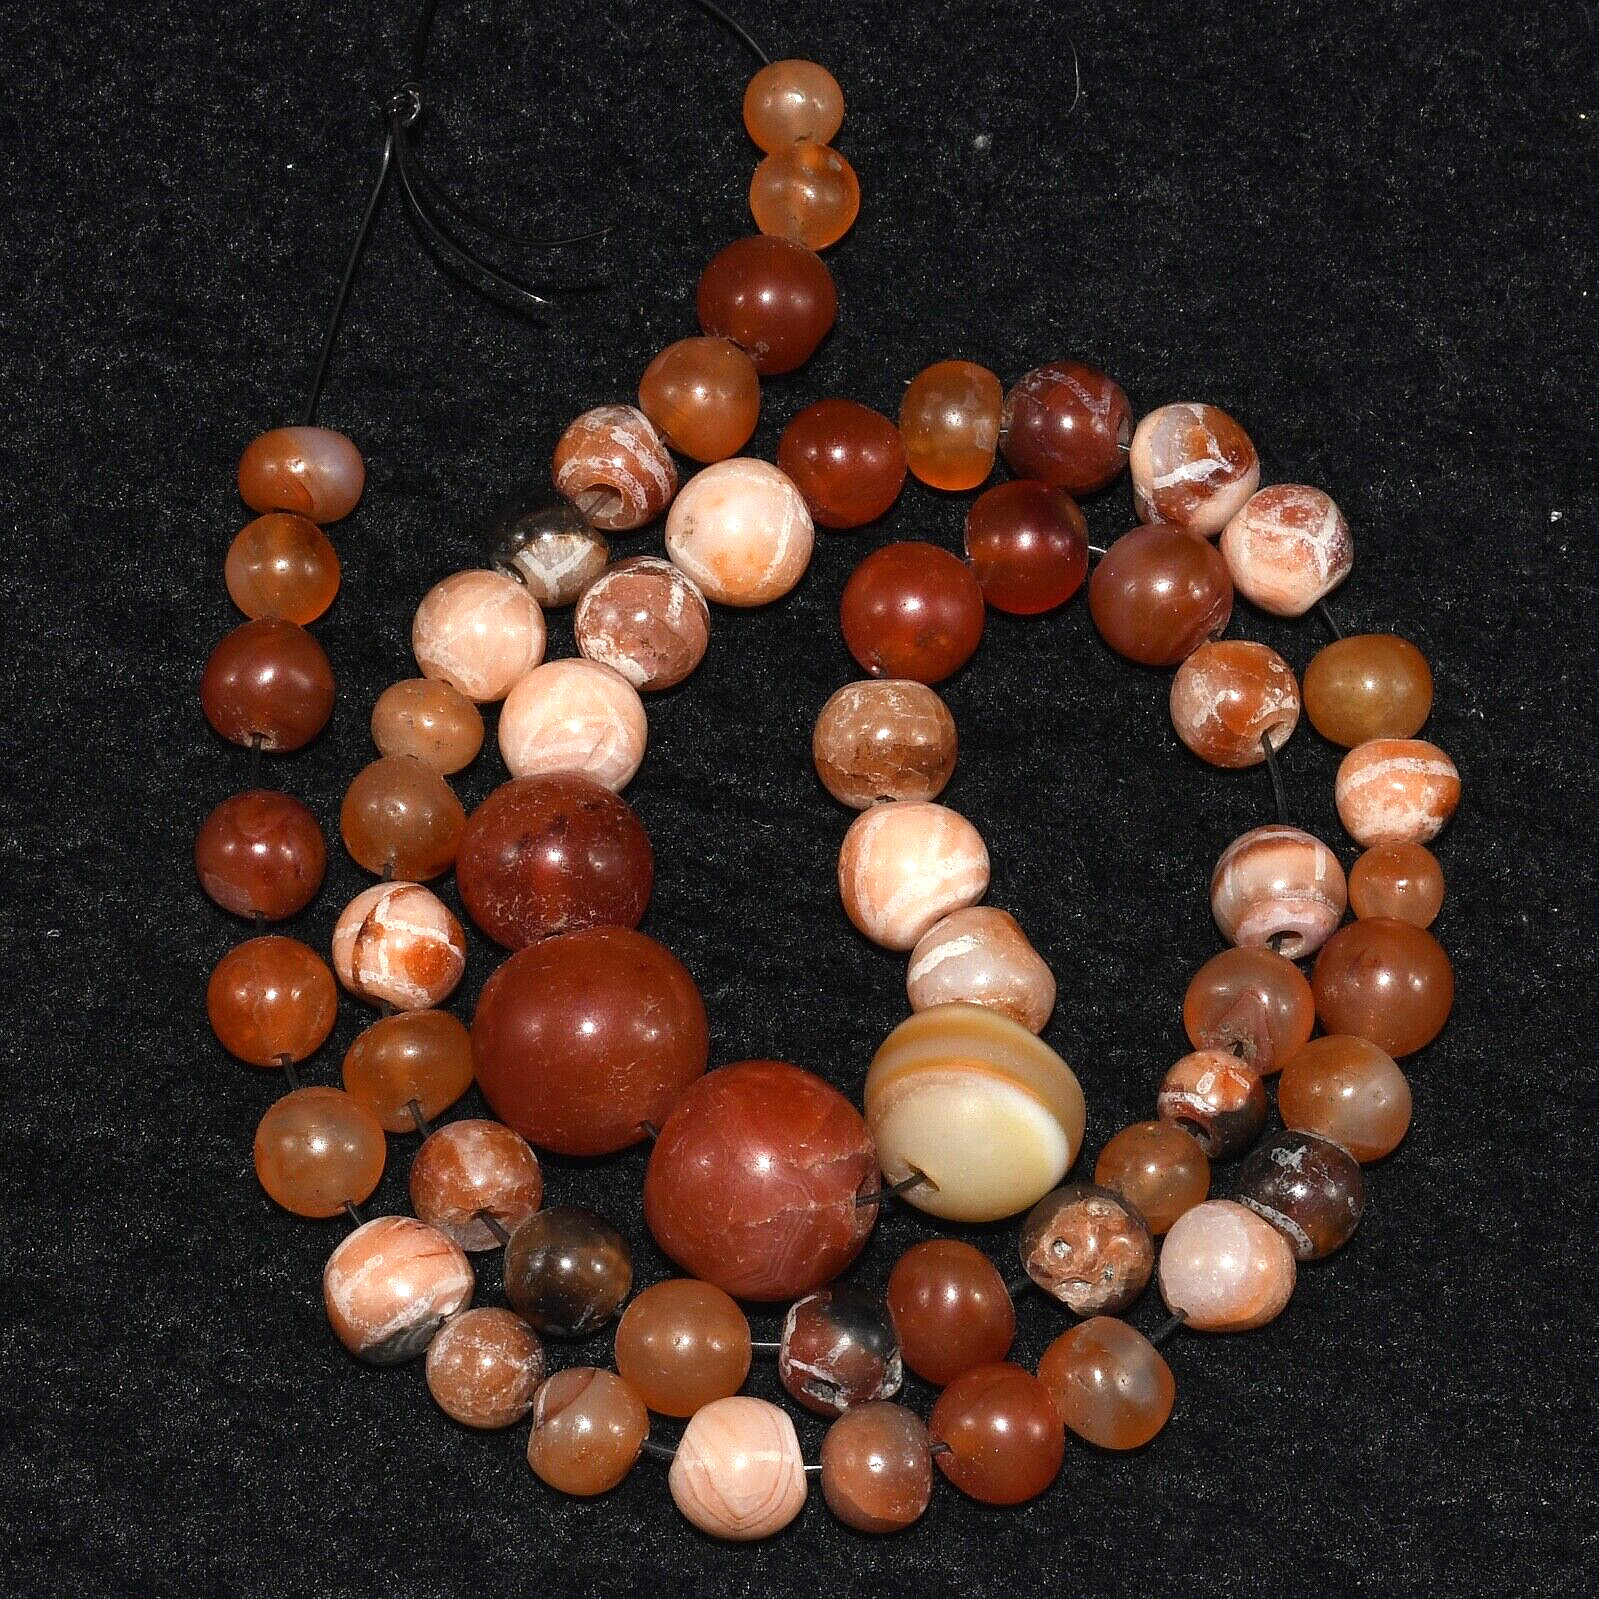 60 Ancient Carnelian Hakik Stone Beads in Good Condition Over 1500+ Years Old